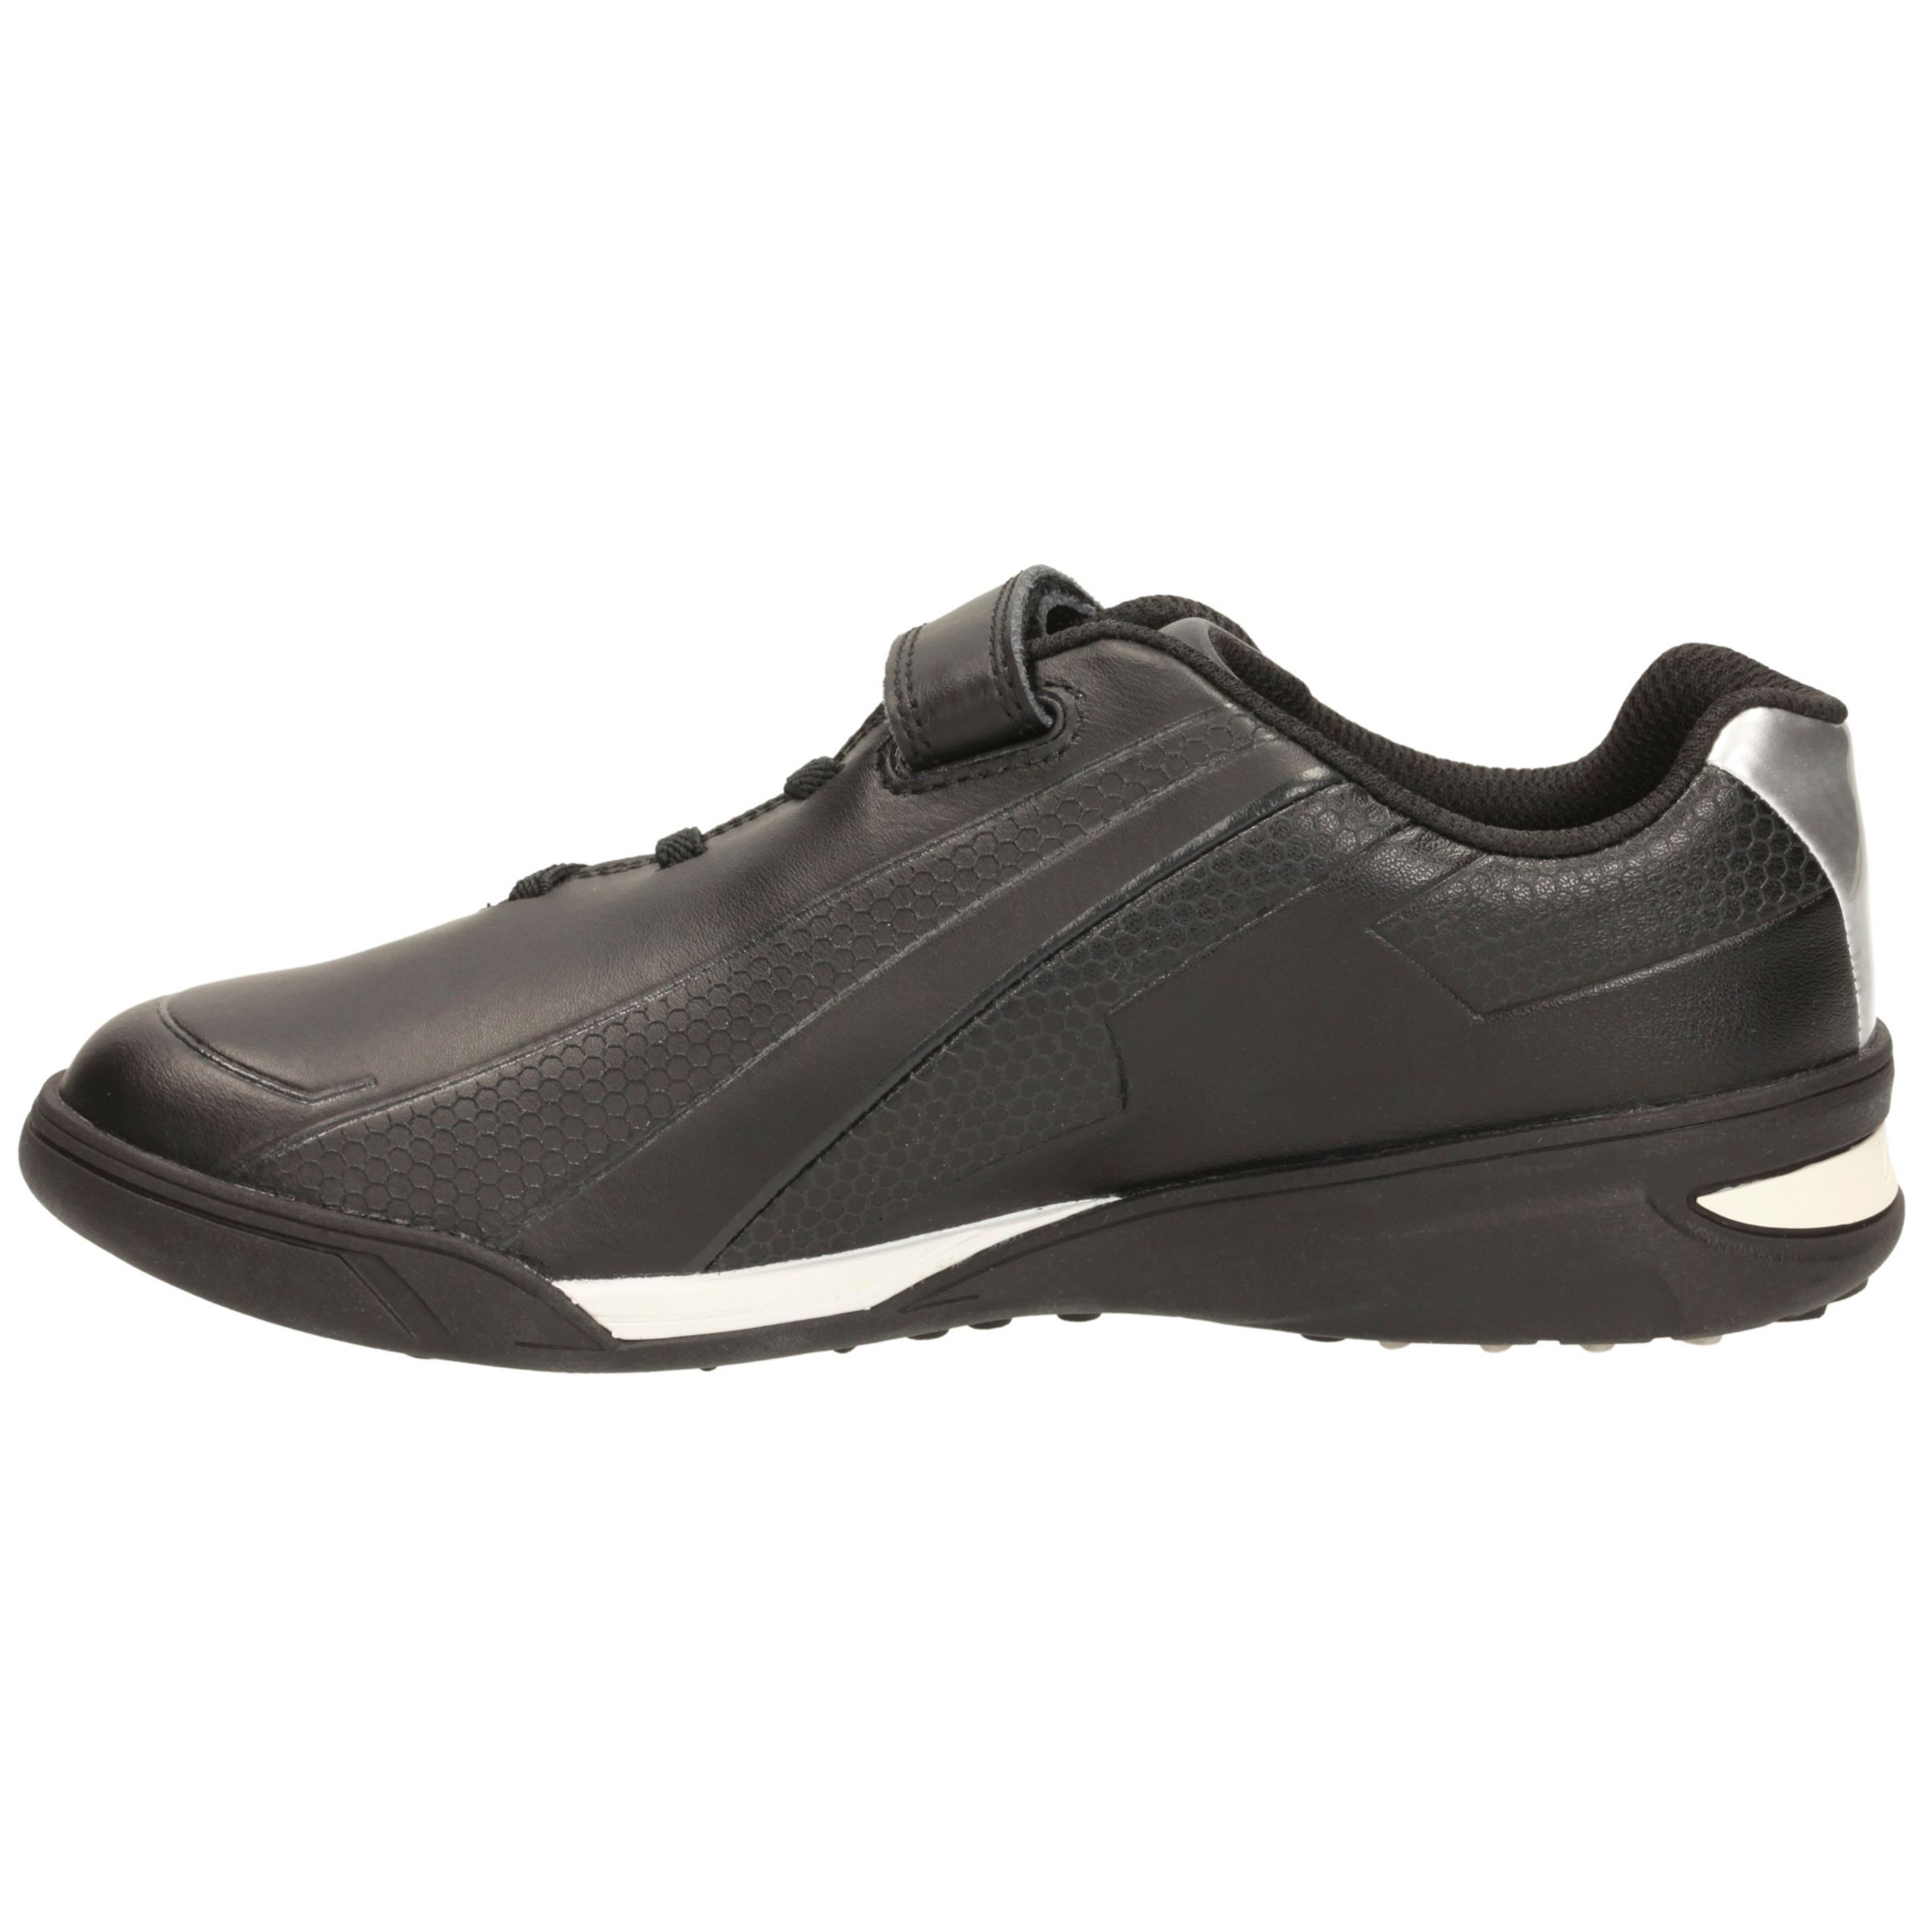 clarks astro turf trainers